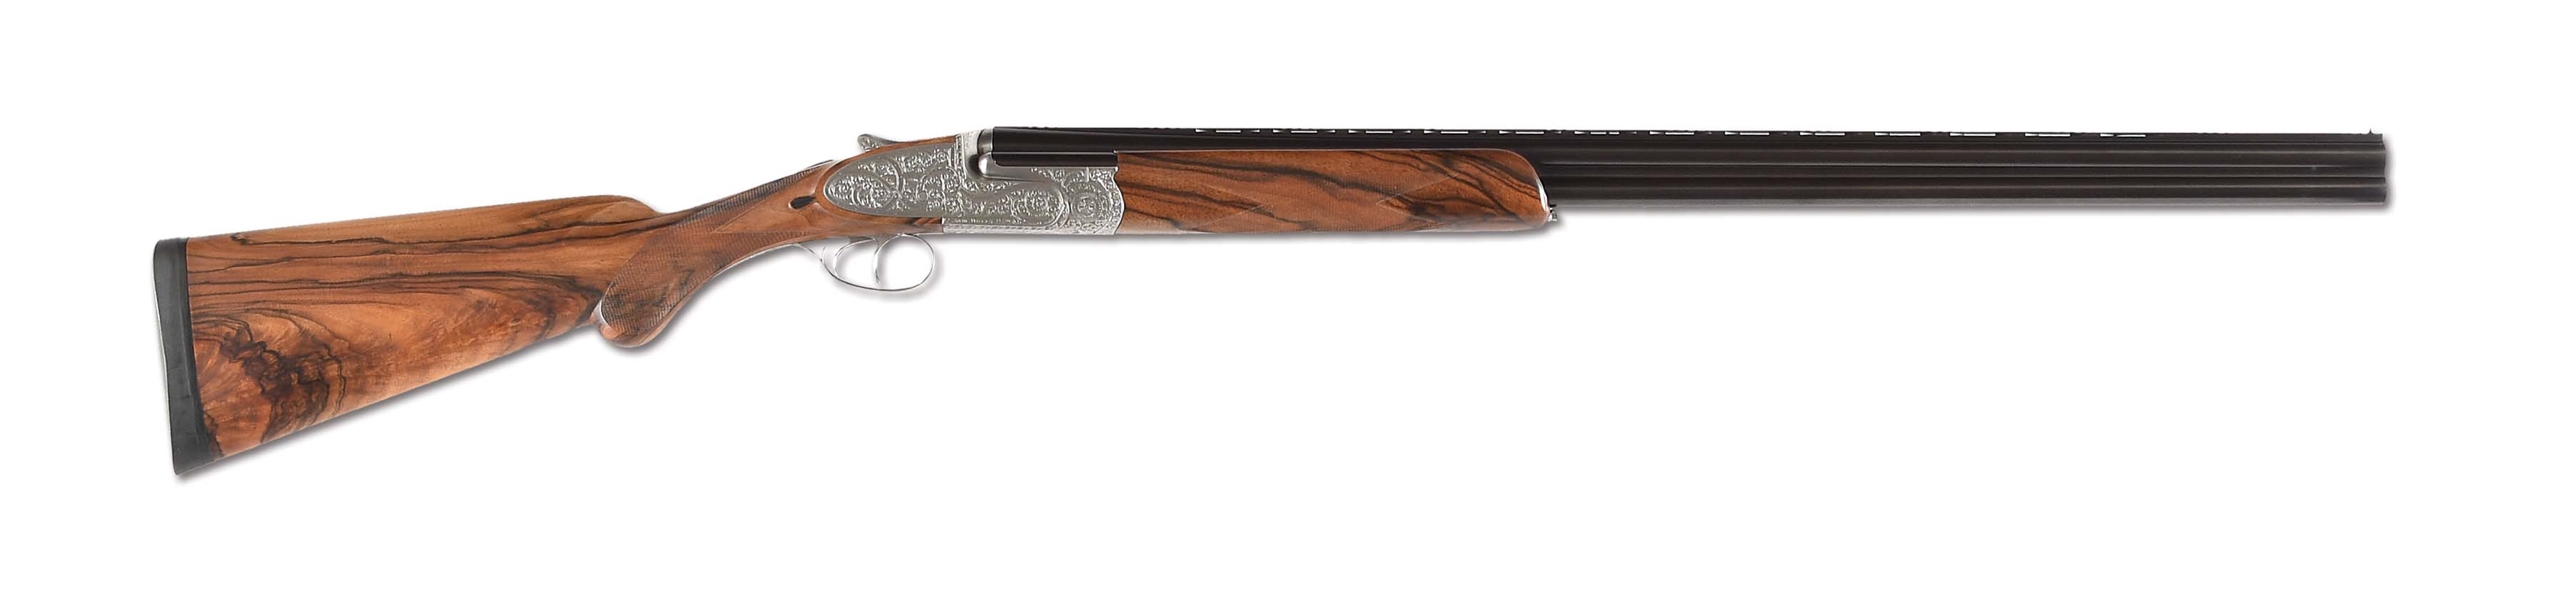 (M) INNOVATIVE 20 GAUGE JOHN WILKES LONDON "SPECIAL SERIES" OVER-UNDER SIDELOCK EJECTOR SHOTGUN ENGRAVED BY GARY GRIFFITHS WITH CASE.